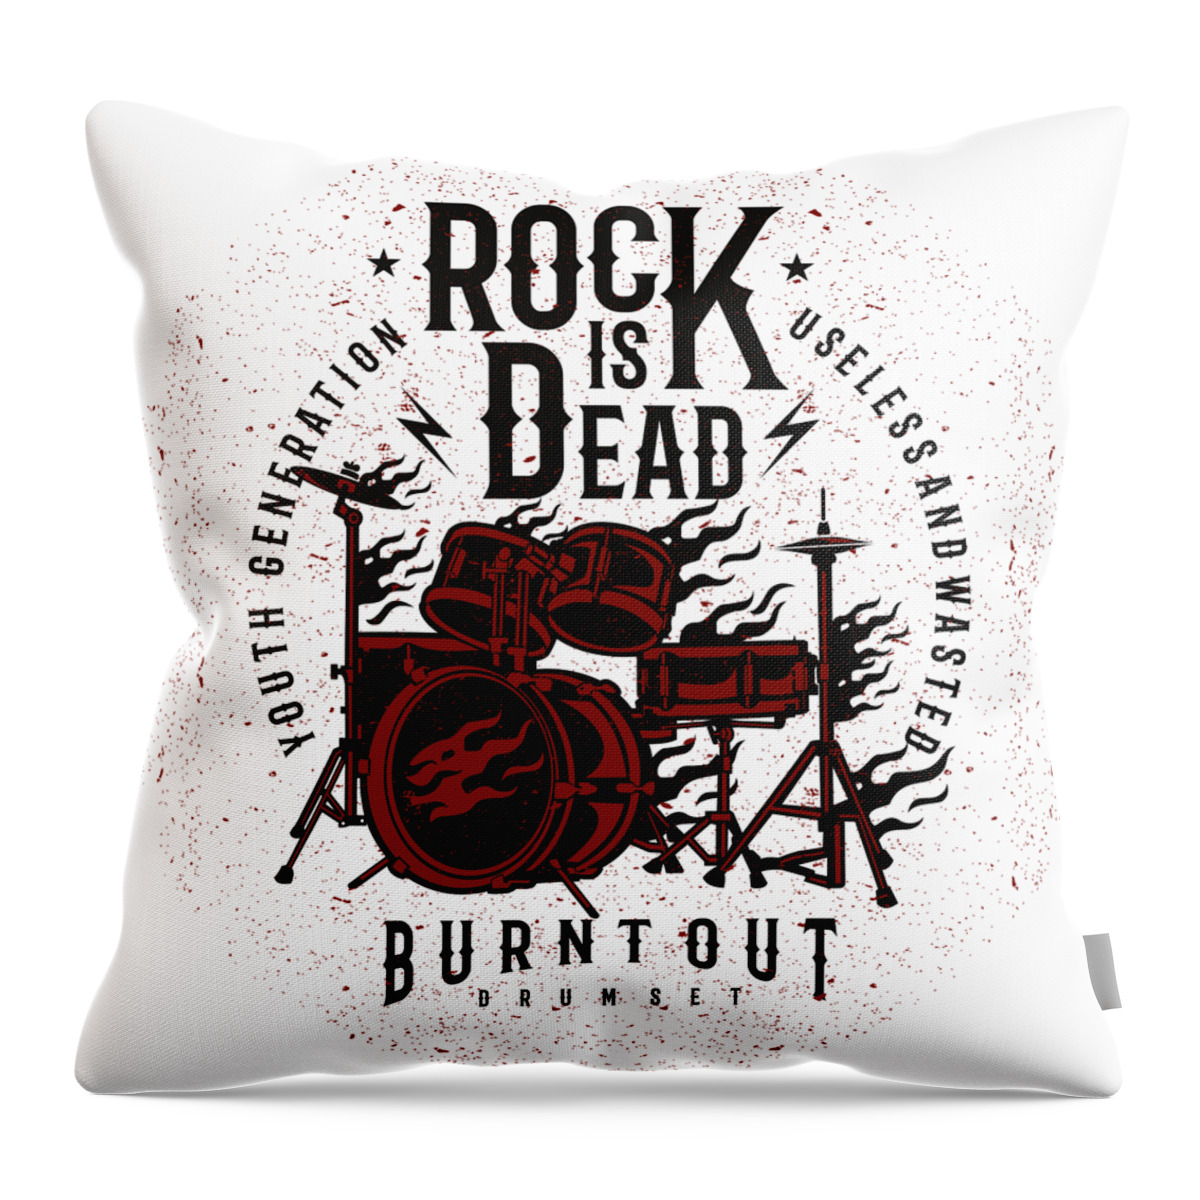 Drums Throw Pillow featuring the digital art Rock is Dead Drums by Long Shot